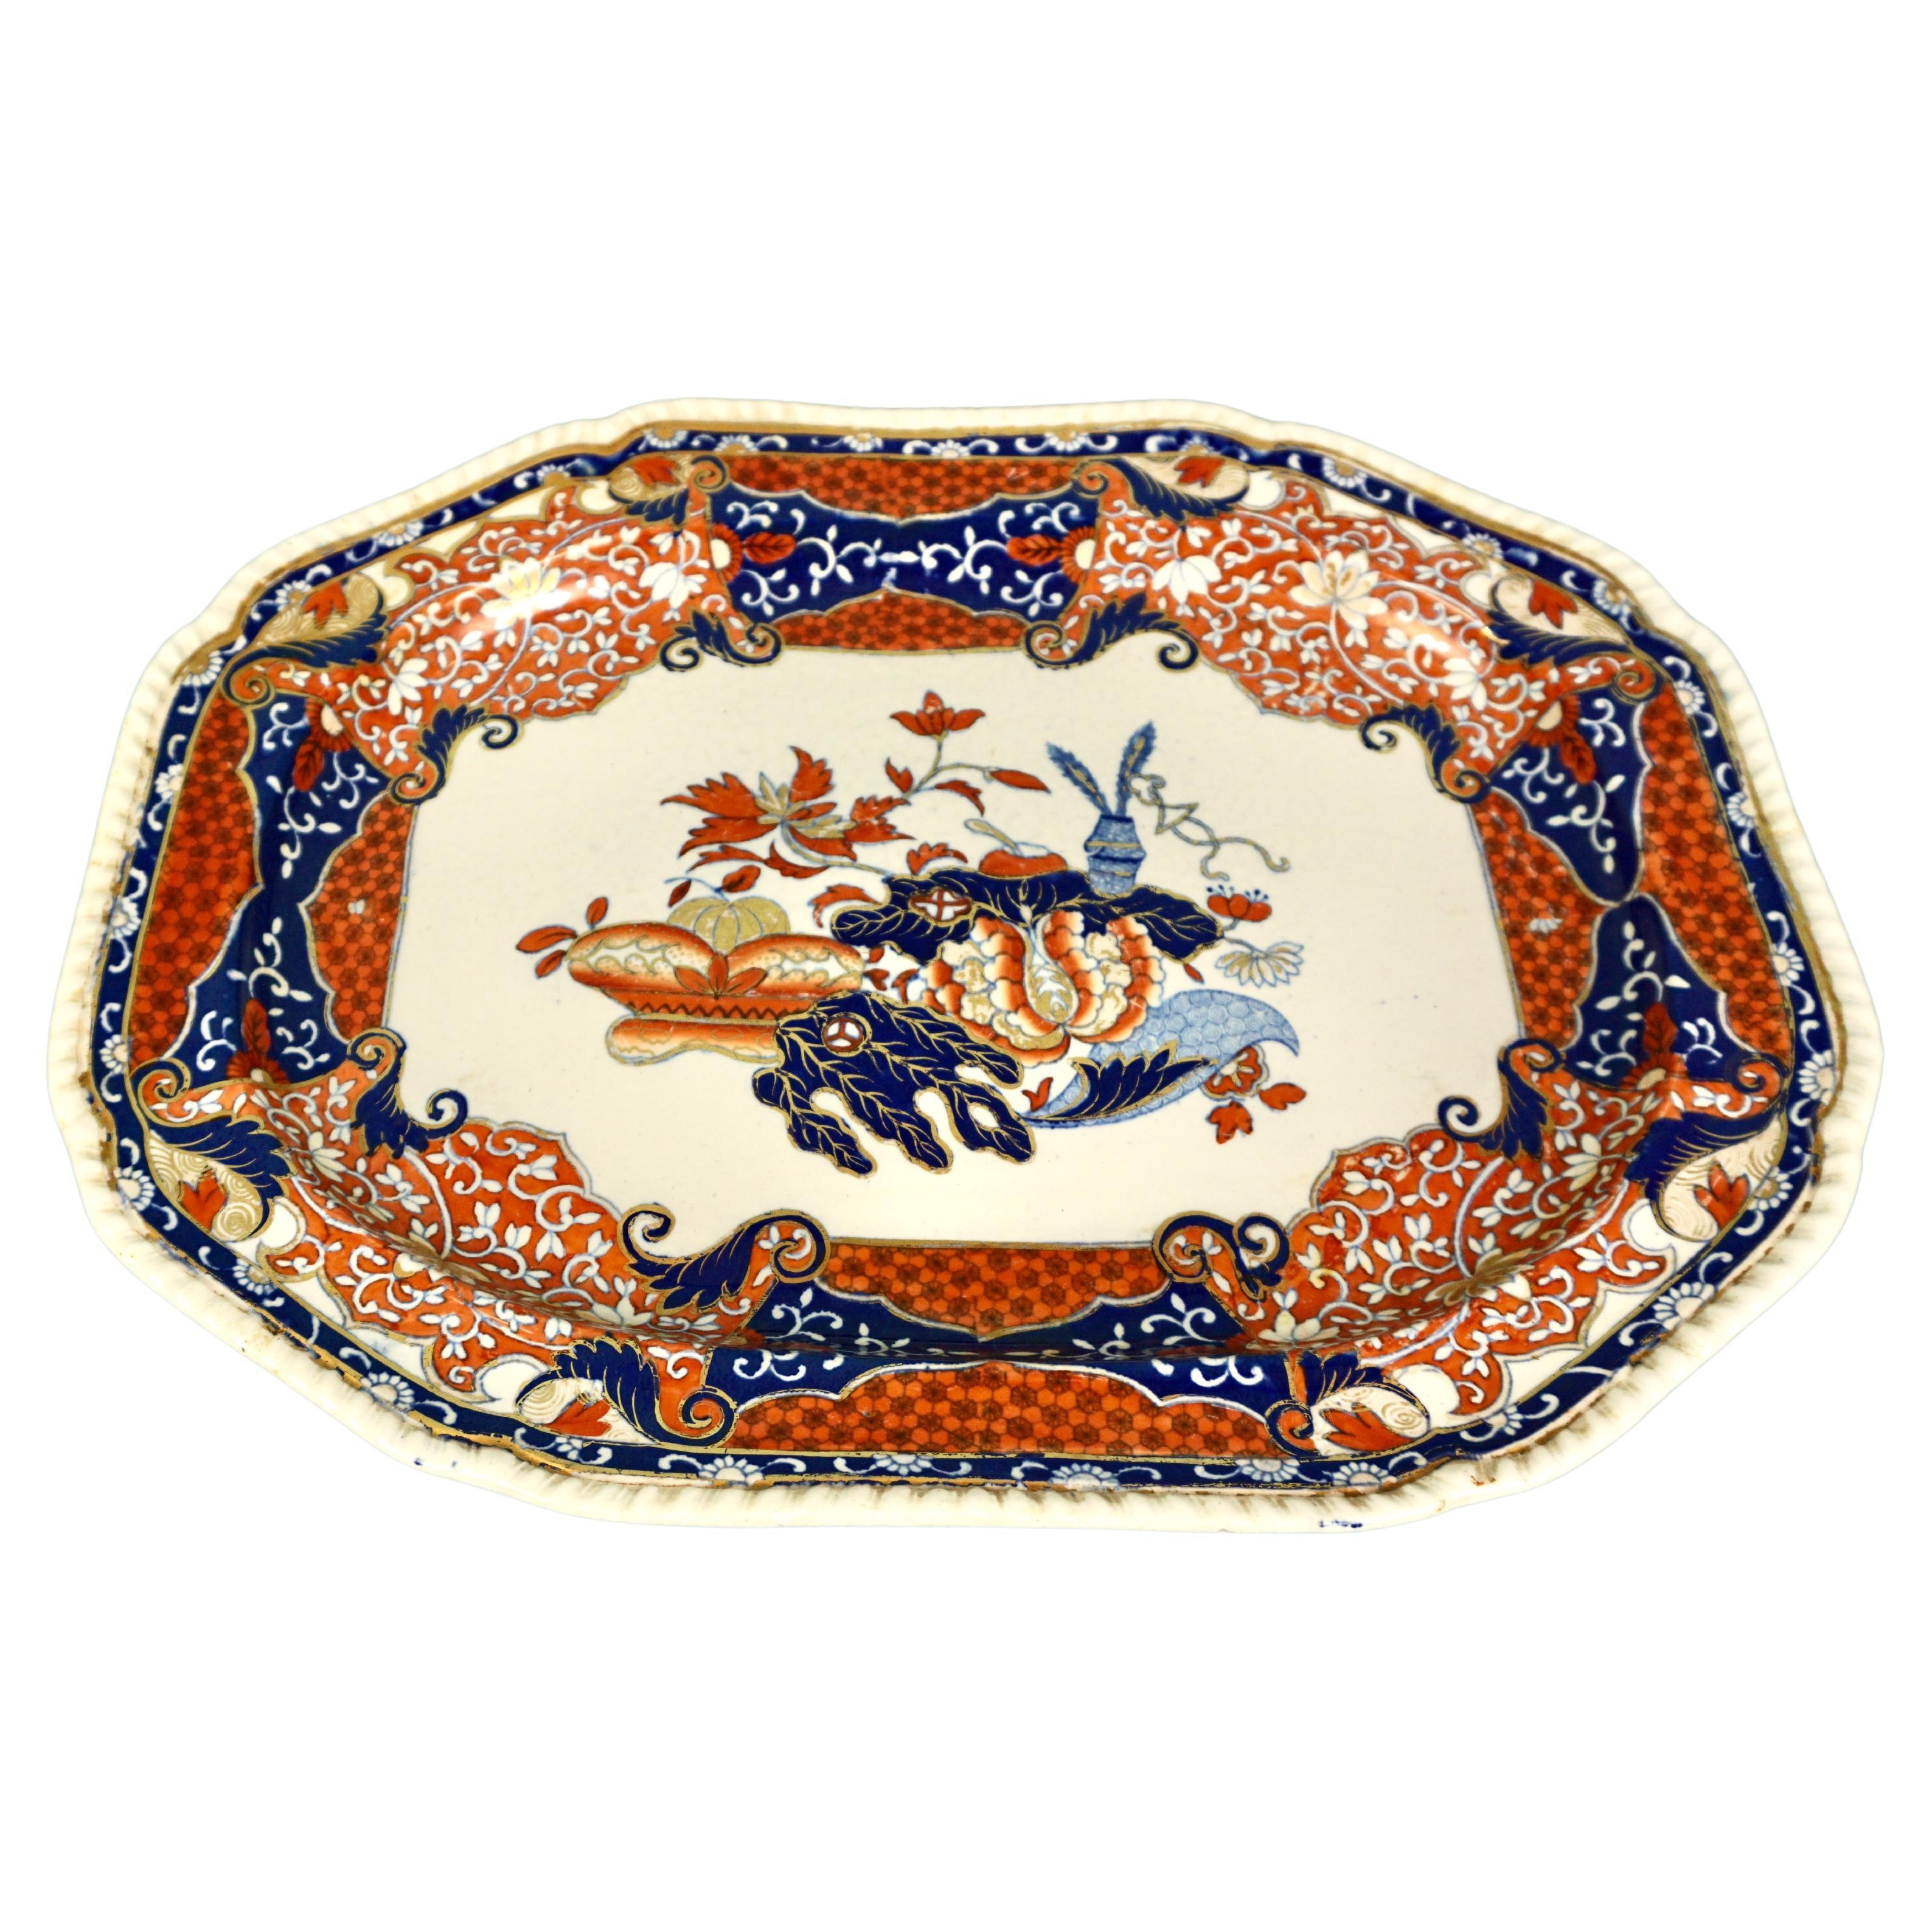 A beautiful English Victorian period Spode porcelain platter of large Size, elaborately decorated with stylized flowers, fruits, leaves and vegetables in blues and reds on a white field with gilt highlights. The pie crust perimeter complements the